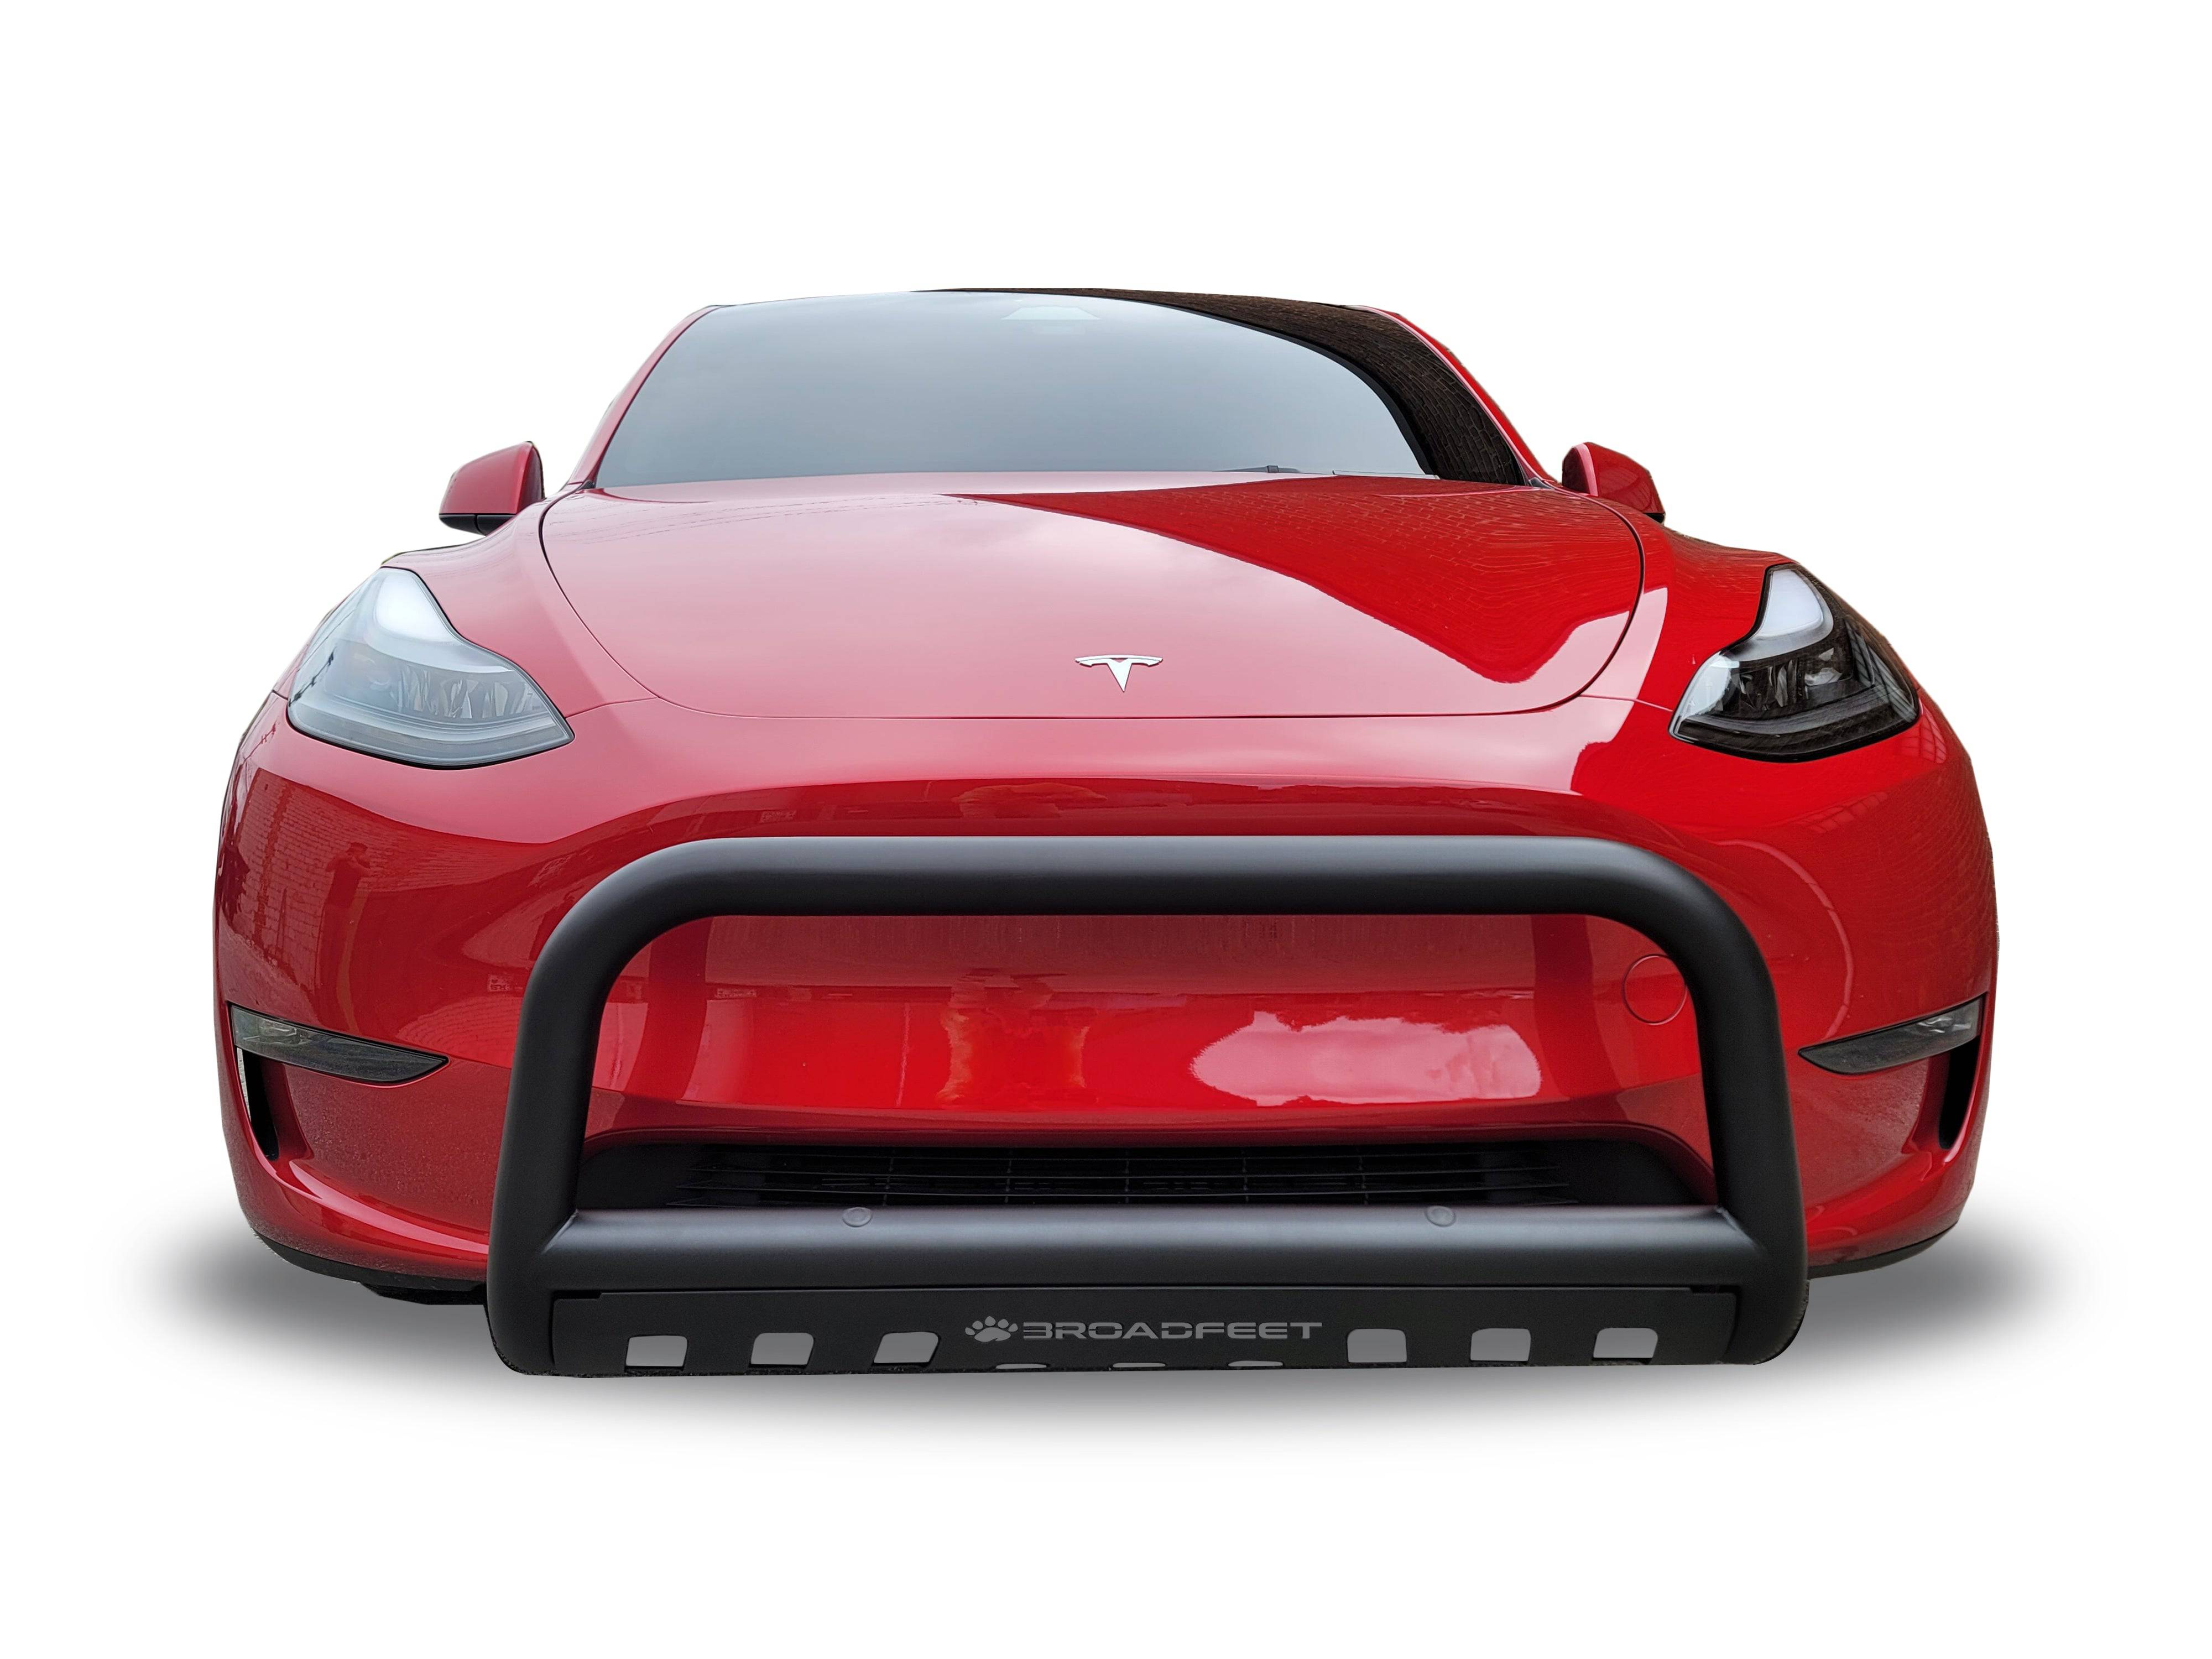 Front Bull Bar with Skid Plate (DW8) Straight Style Bumper Guard fits Tesla Model Y 2020-2024 - Broadfeet